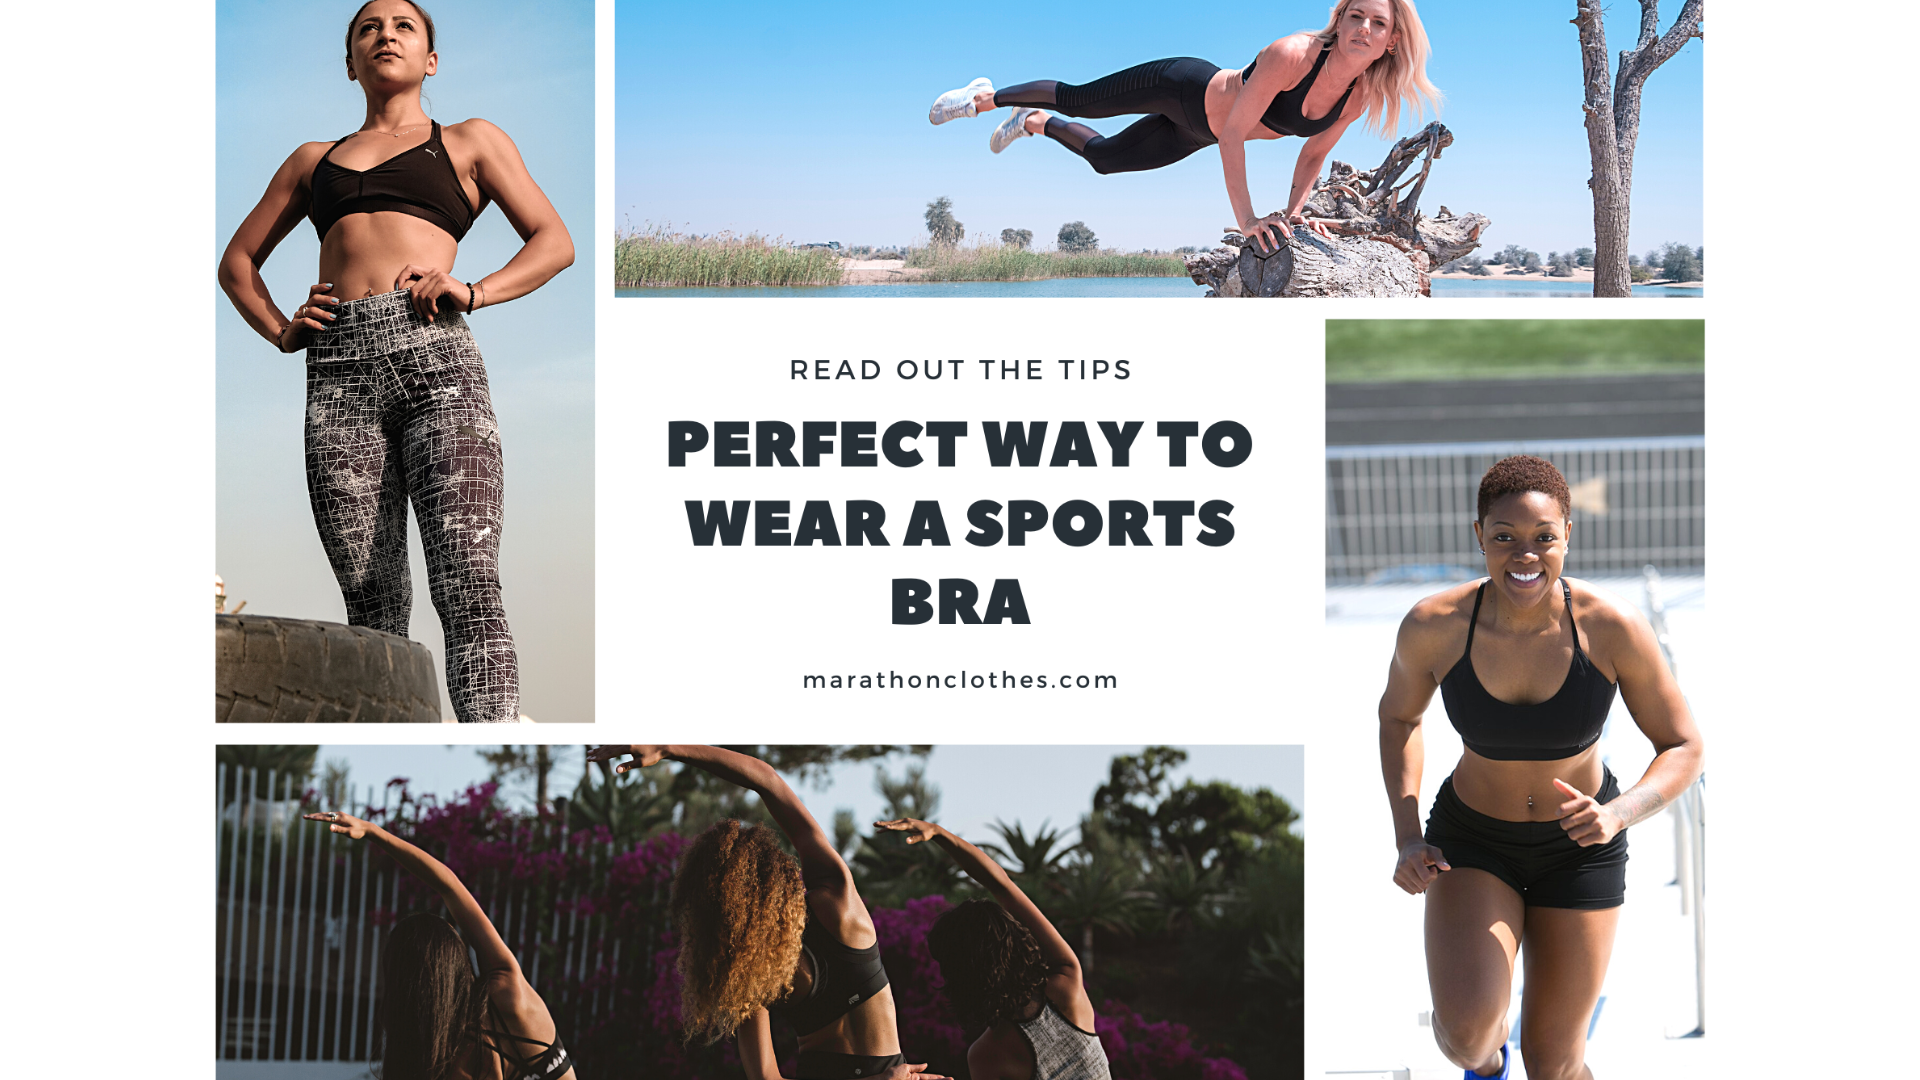 Instructive Advice: Can You Wear a Sports Bra as a Top?